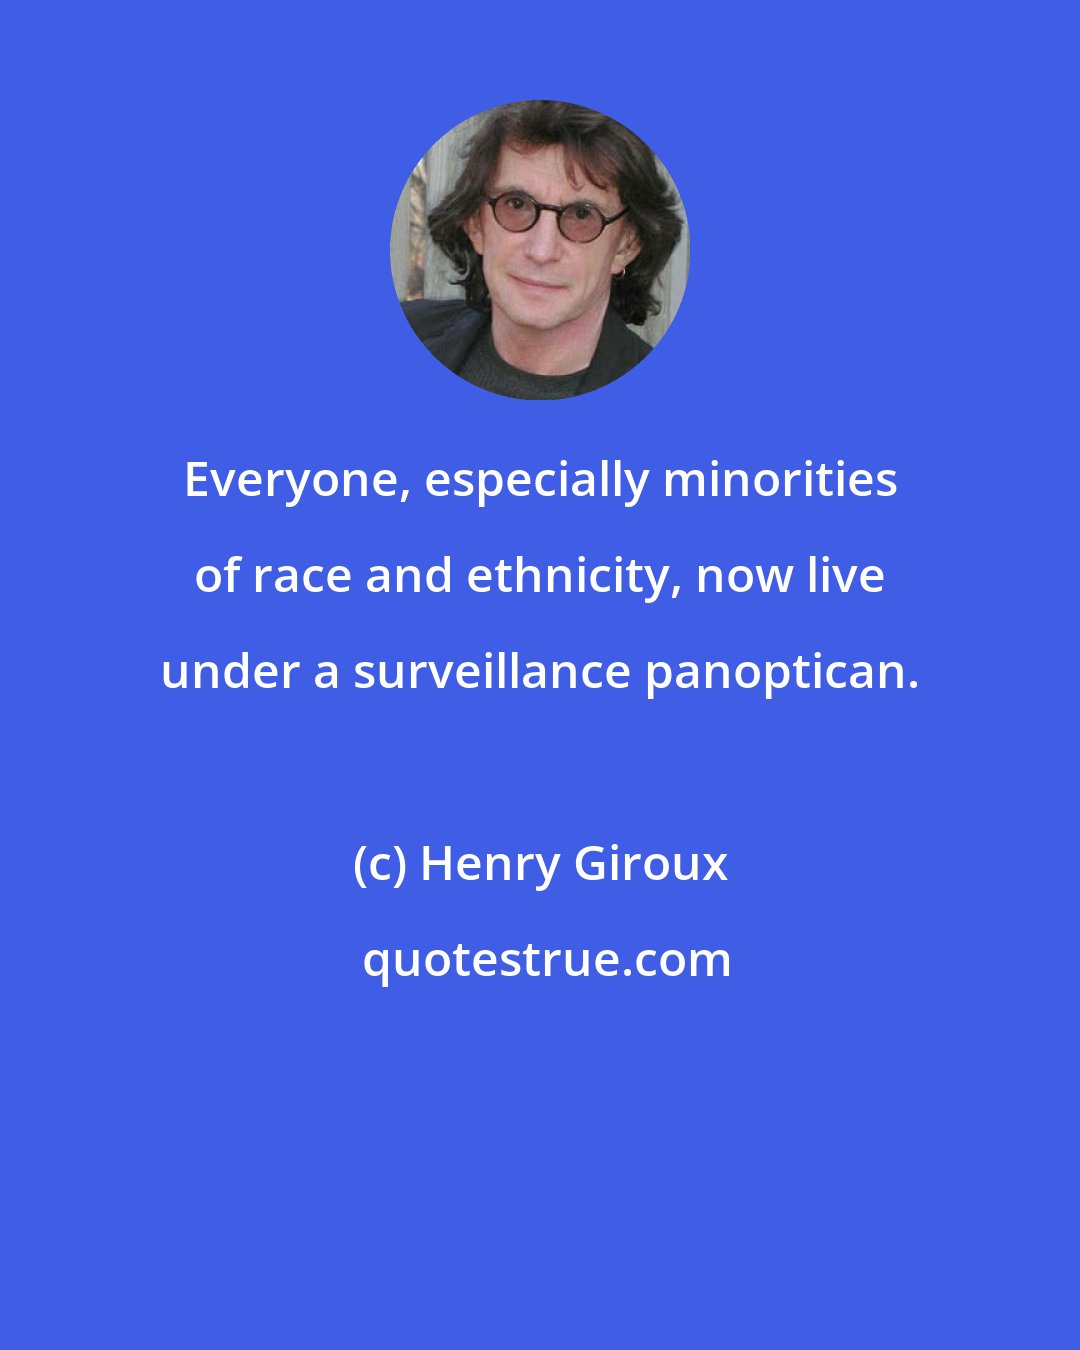 Henry Giroux: Everyone, especially minorities of race and ethnicity, now live under a surveillance panoptican.